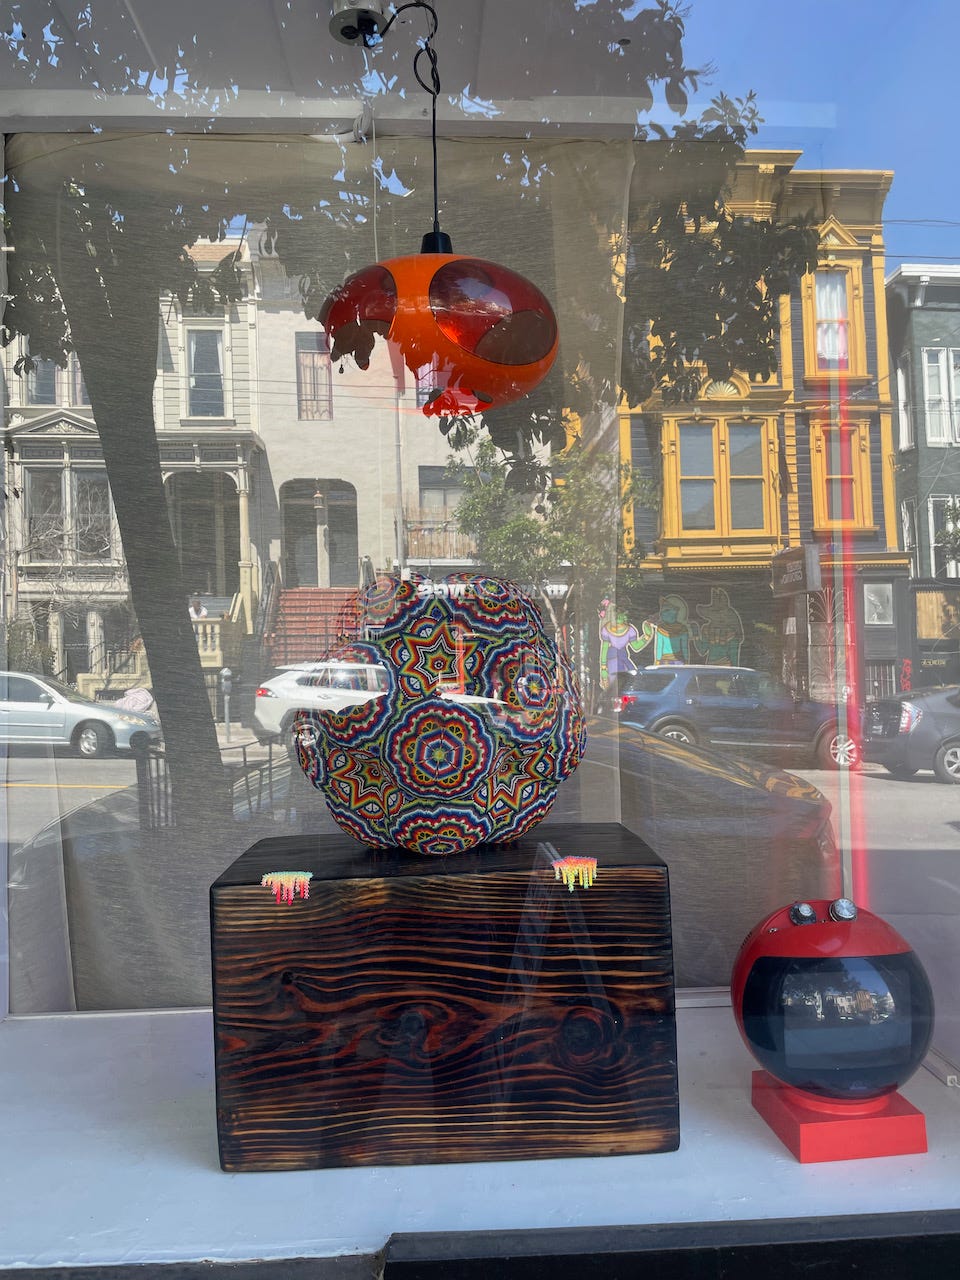 Image of a window with reflections on lower Haight Street